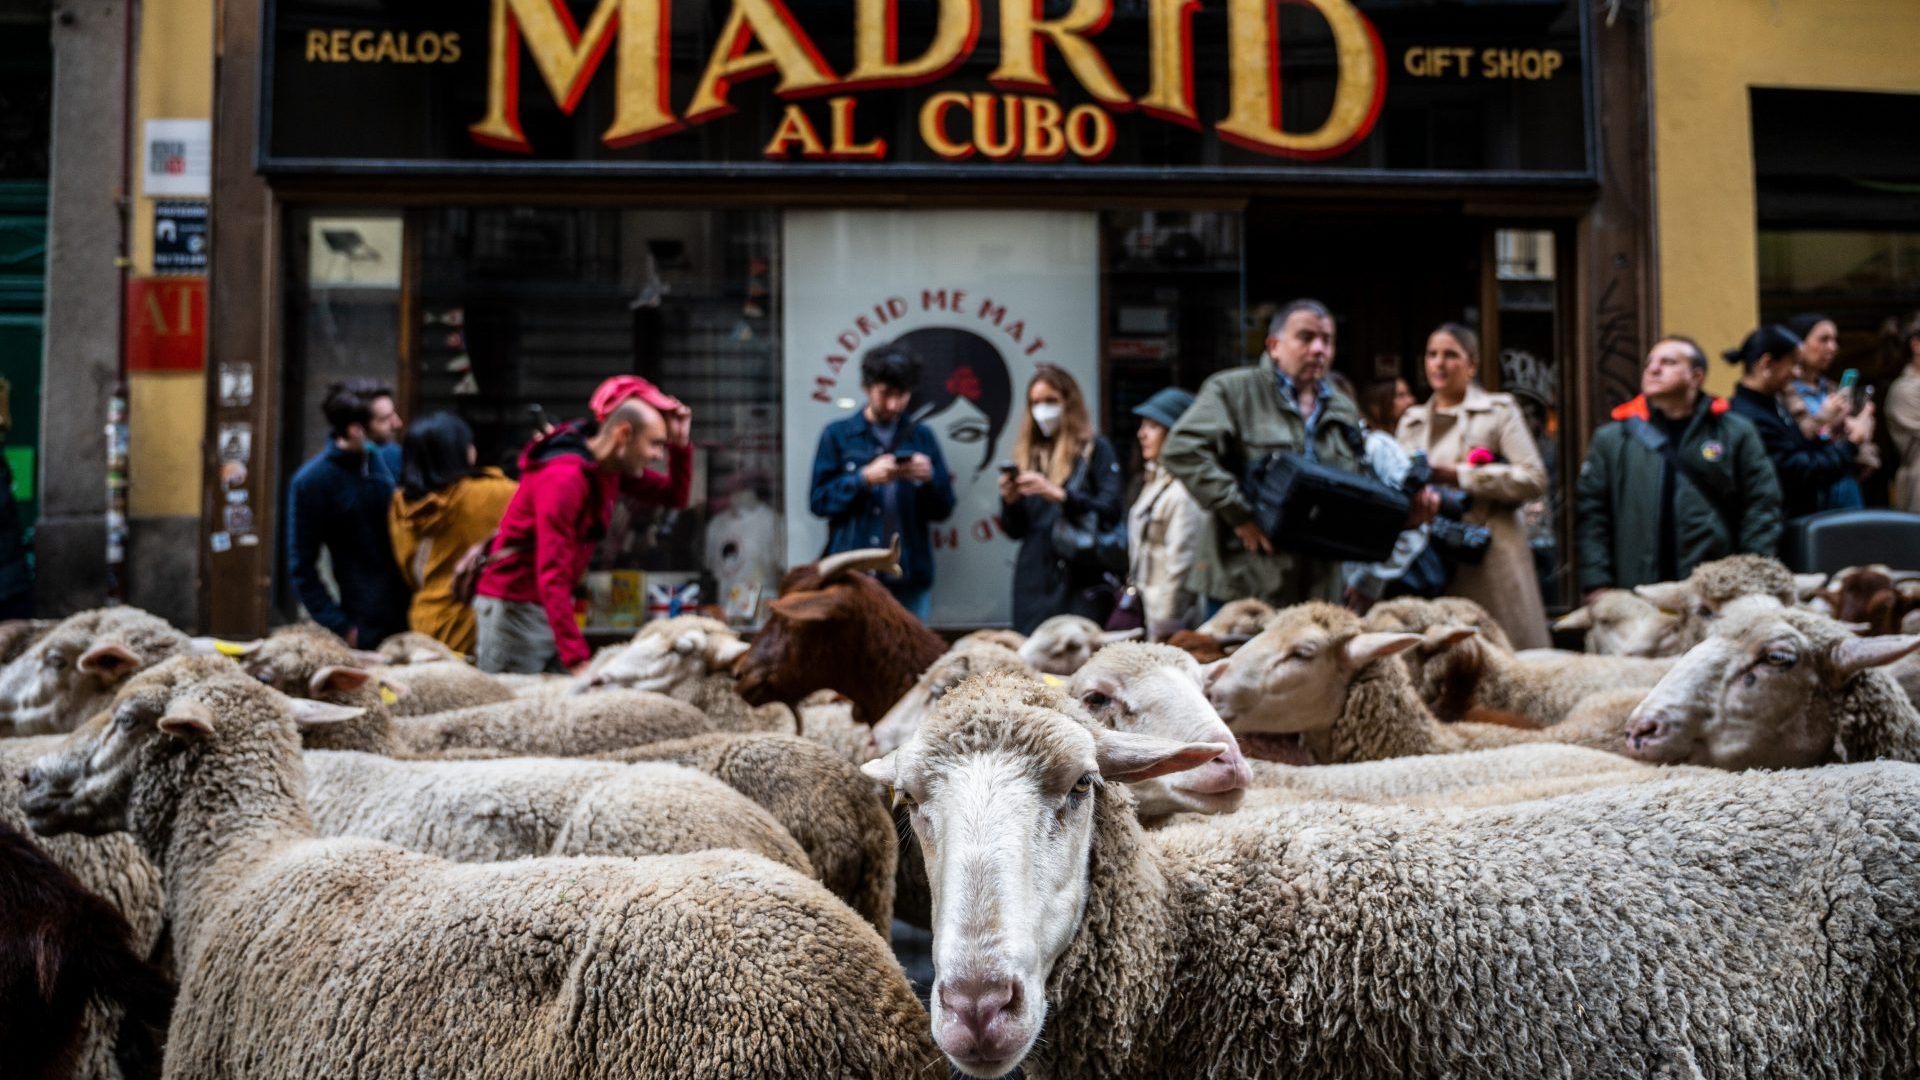 Since 1994, the annual Transhumance festival has claimed the role of transhumance and extensive livestock farming can be a tool for conserving biodiversity and fighting climate change, defending also the use of ancient livestock trails and migration rights. Photo: Marcos del Mazo/LightRocket via Getty Images)